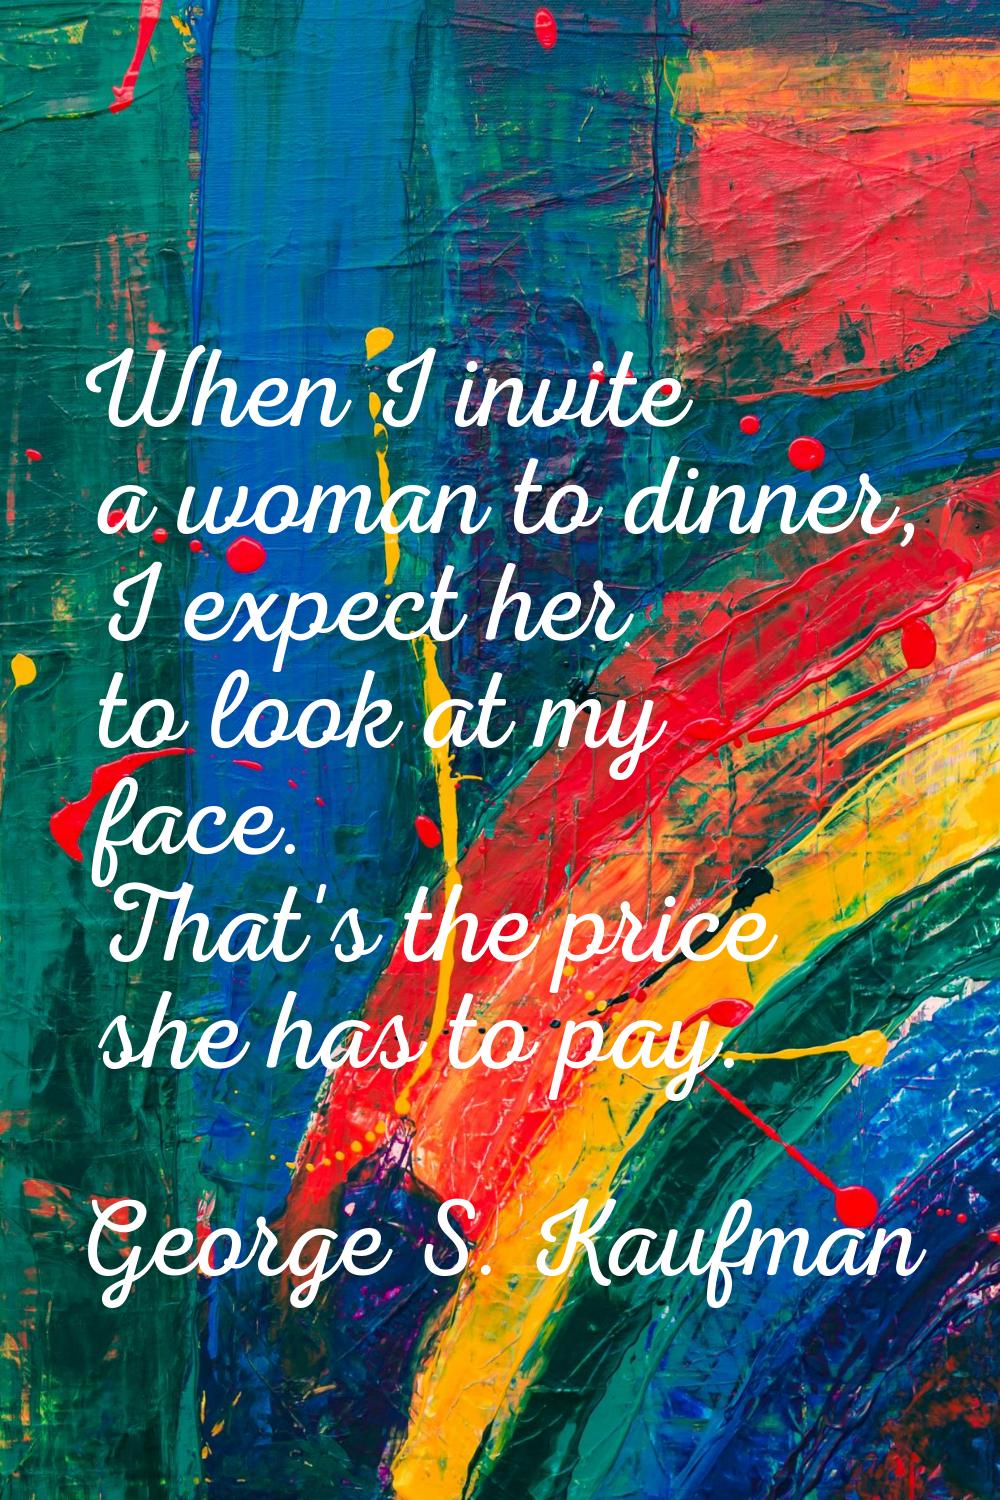 When I invite a woman to dinner, I expect her to look at my face. That's the price she has to pay.